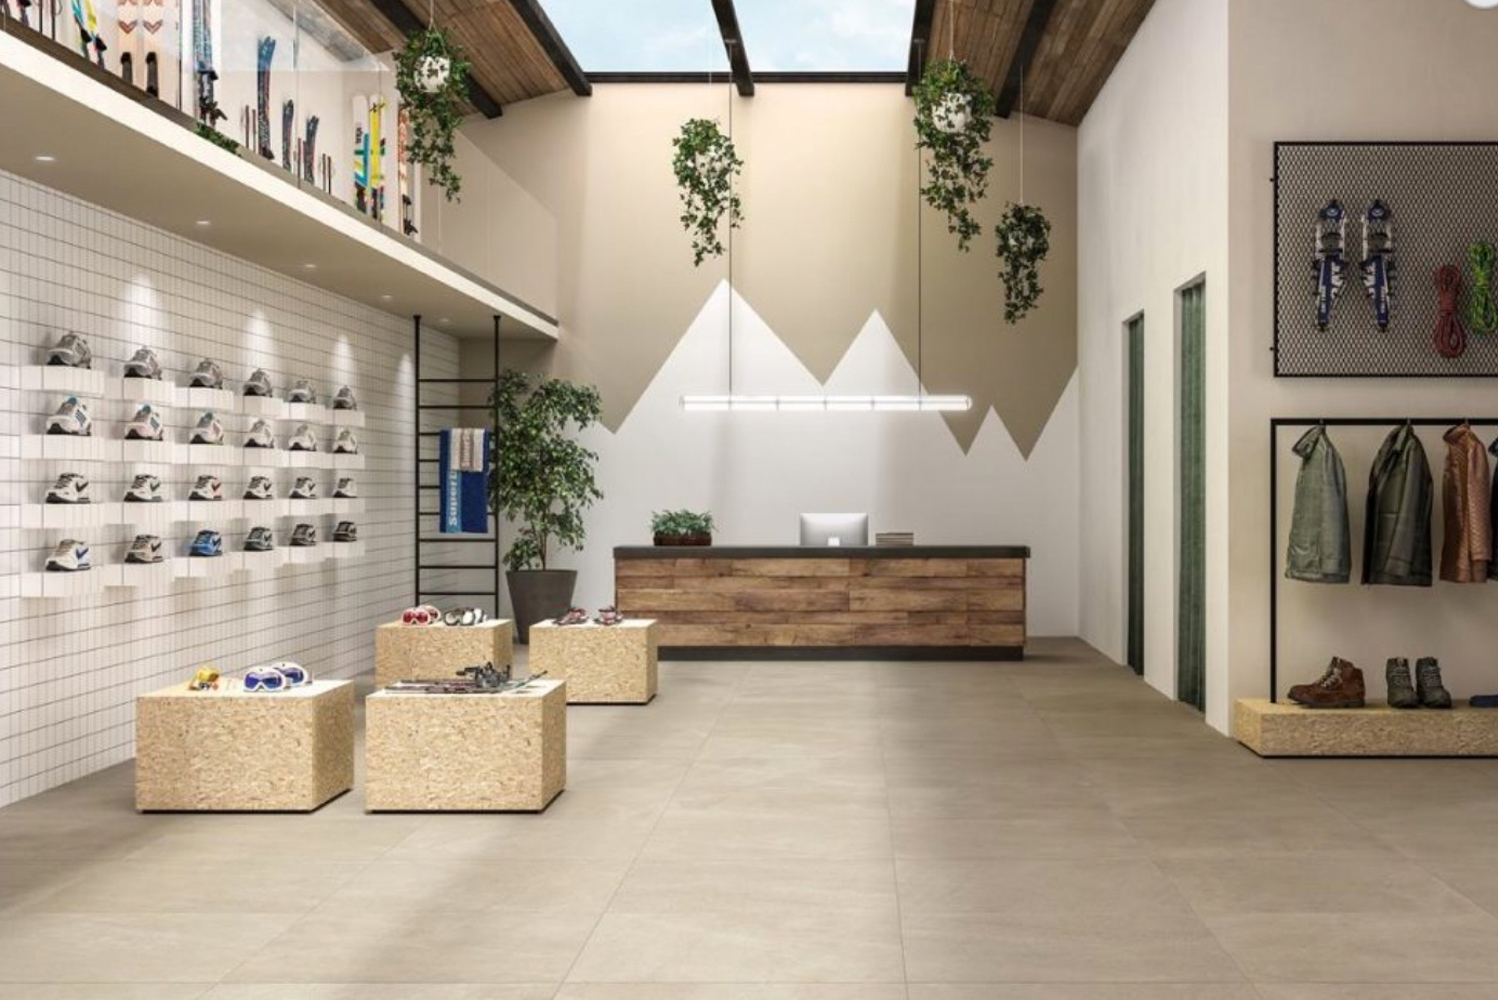 Blustyle launched the Yosemite collection of porcelain tiles